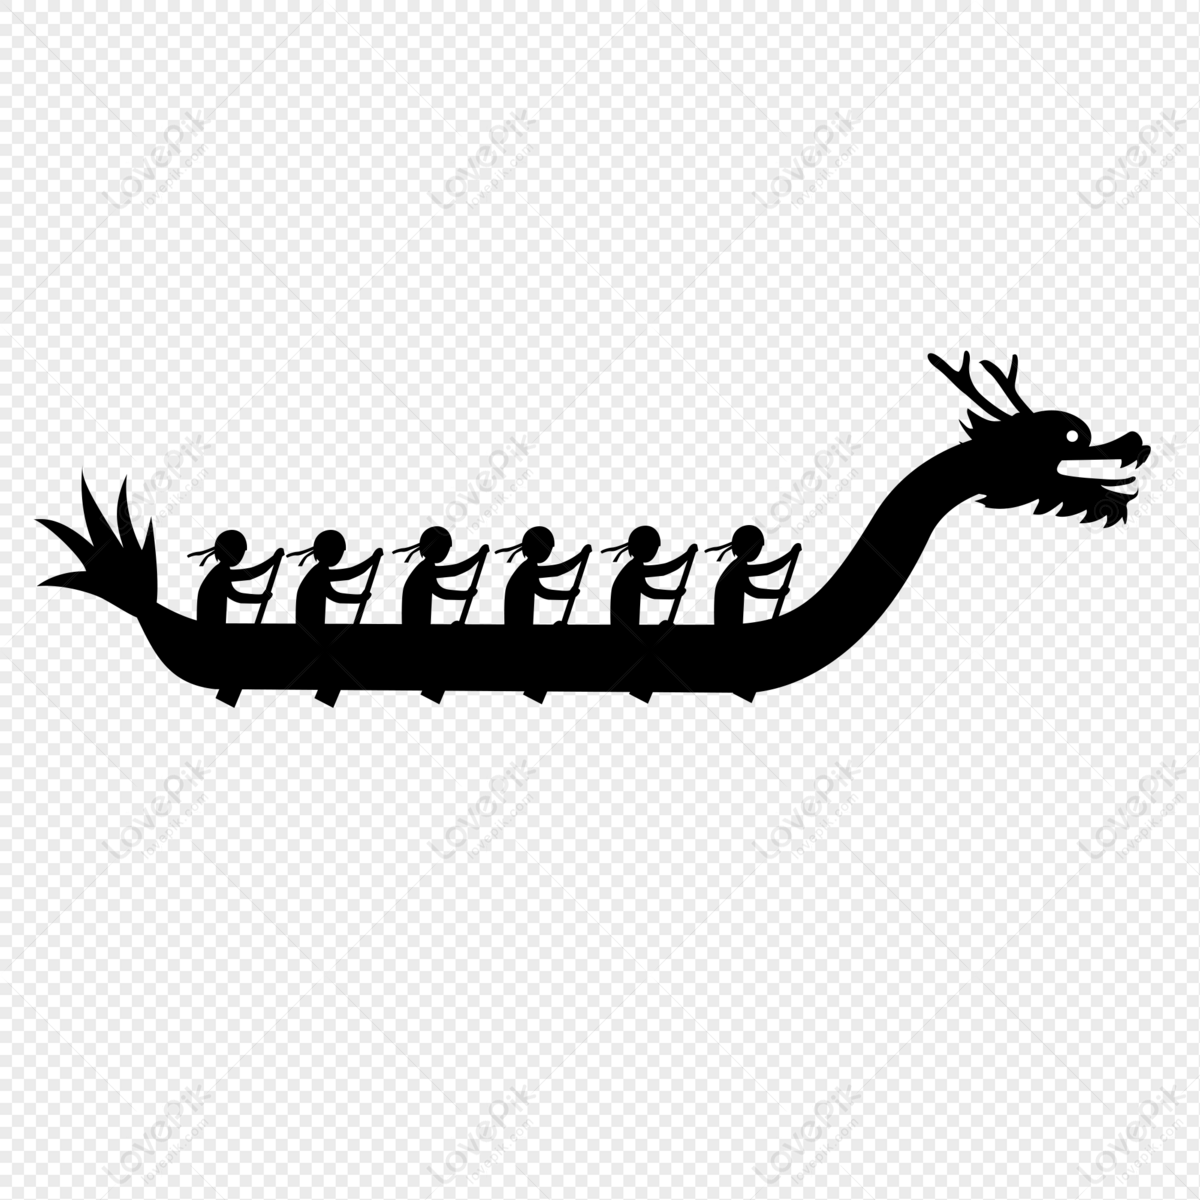 Dragon Boat Silhouette, dragon silhouette, dragon boat festival, boat silhouette png transparent image